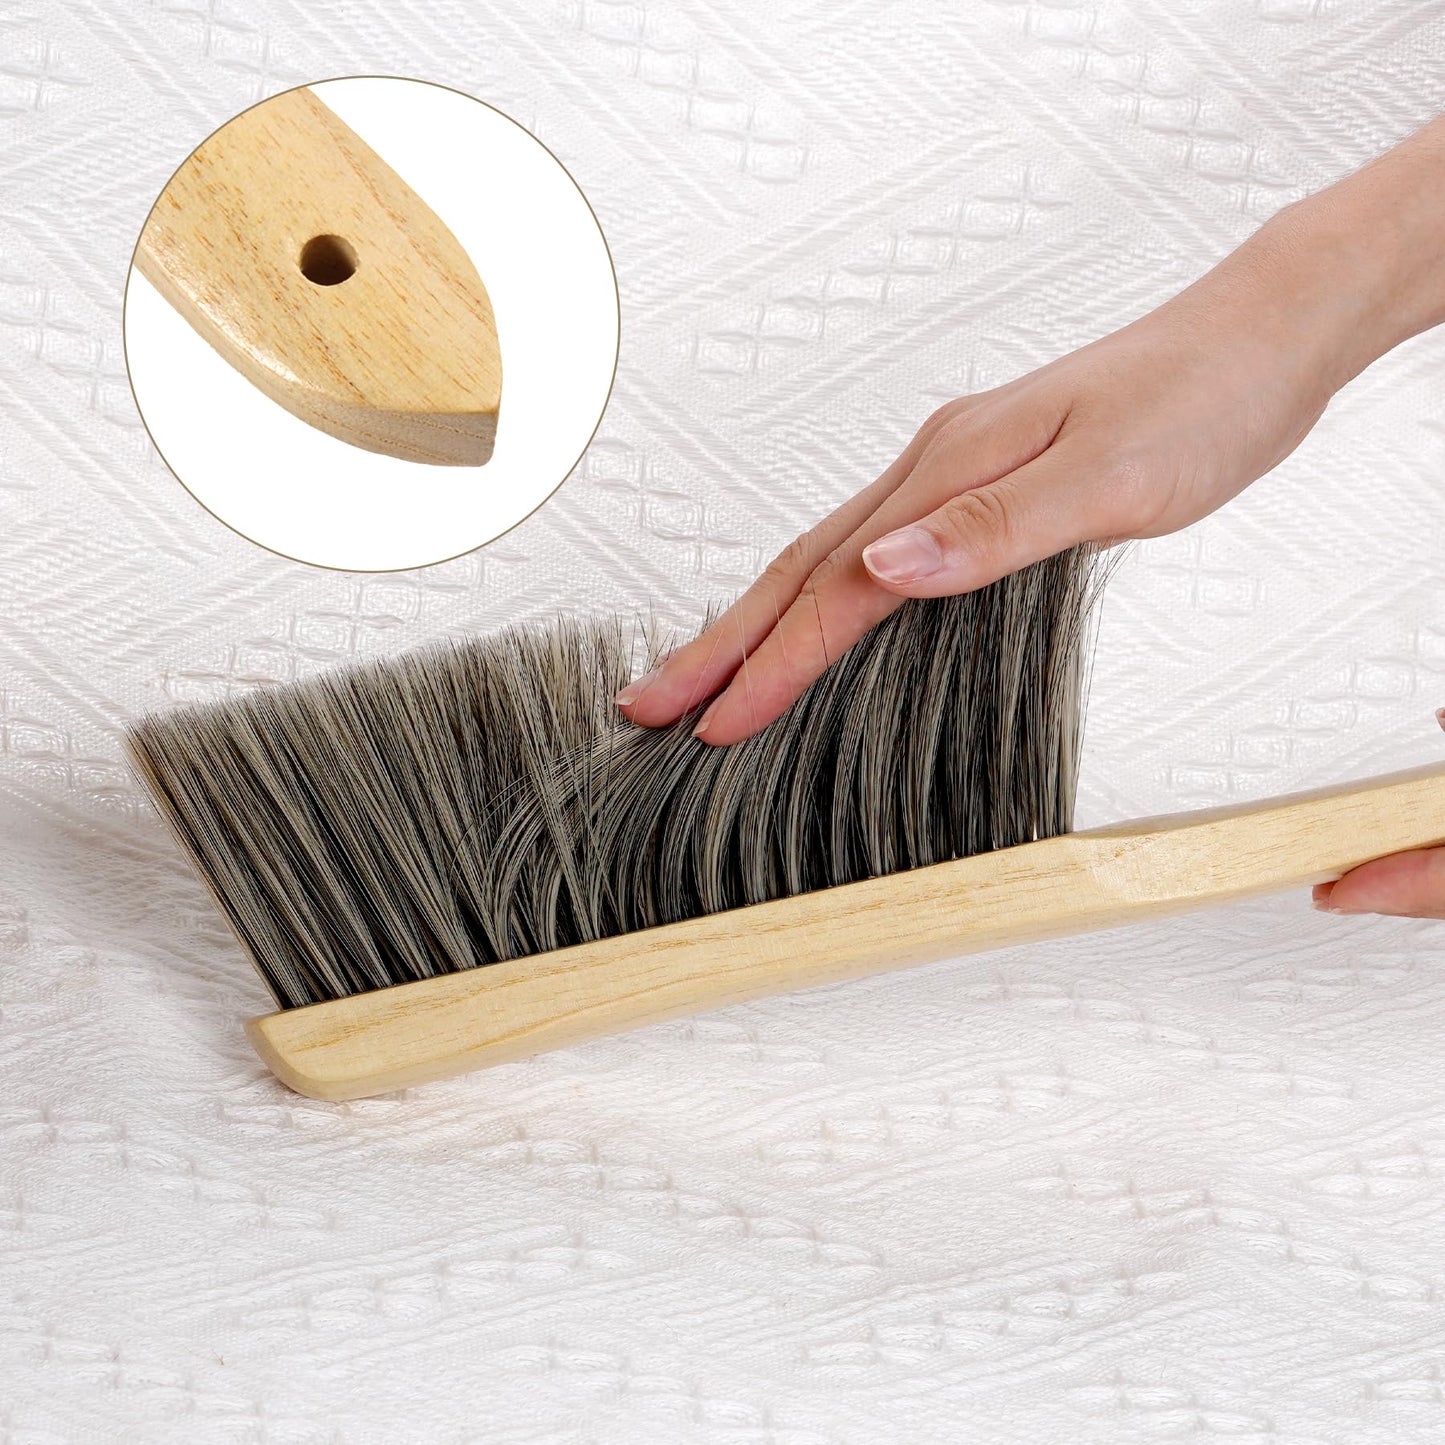 Rbenxia 2 Pieces Wooden Handle Bench Brushes Horse Hair Brushes Soft Bristles Dust Brush Household Cleaning Brushes for Fireplace, Sofa, Furniture,